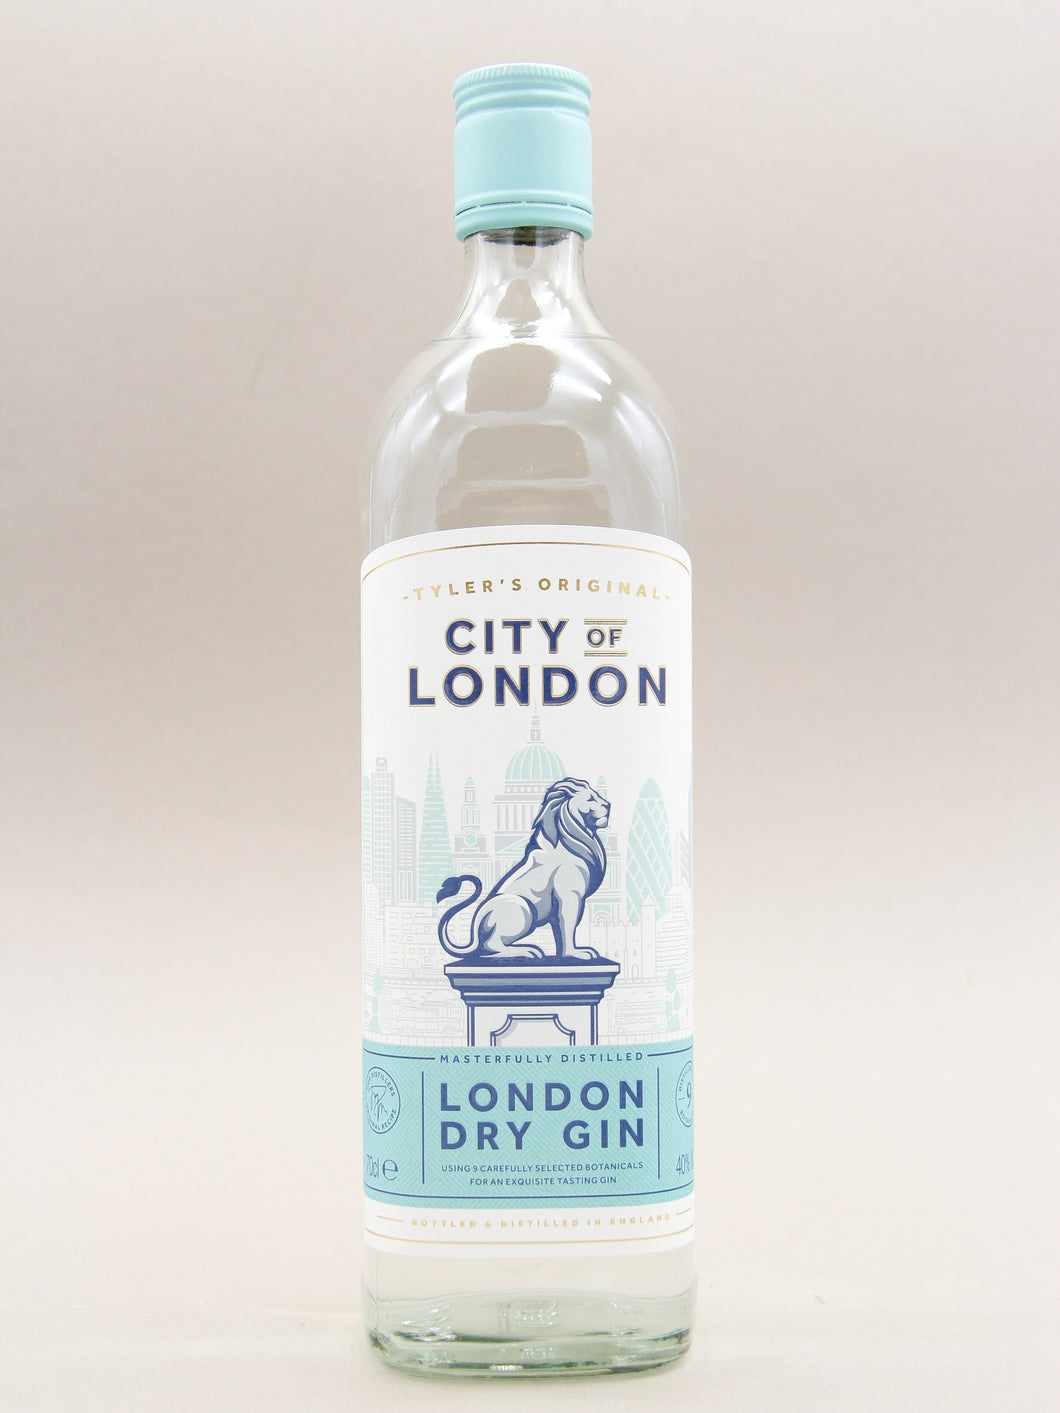 City of London, London Dry Gin (40%, 70cl)